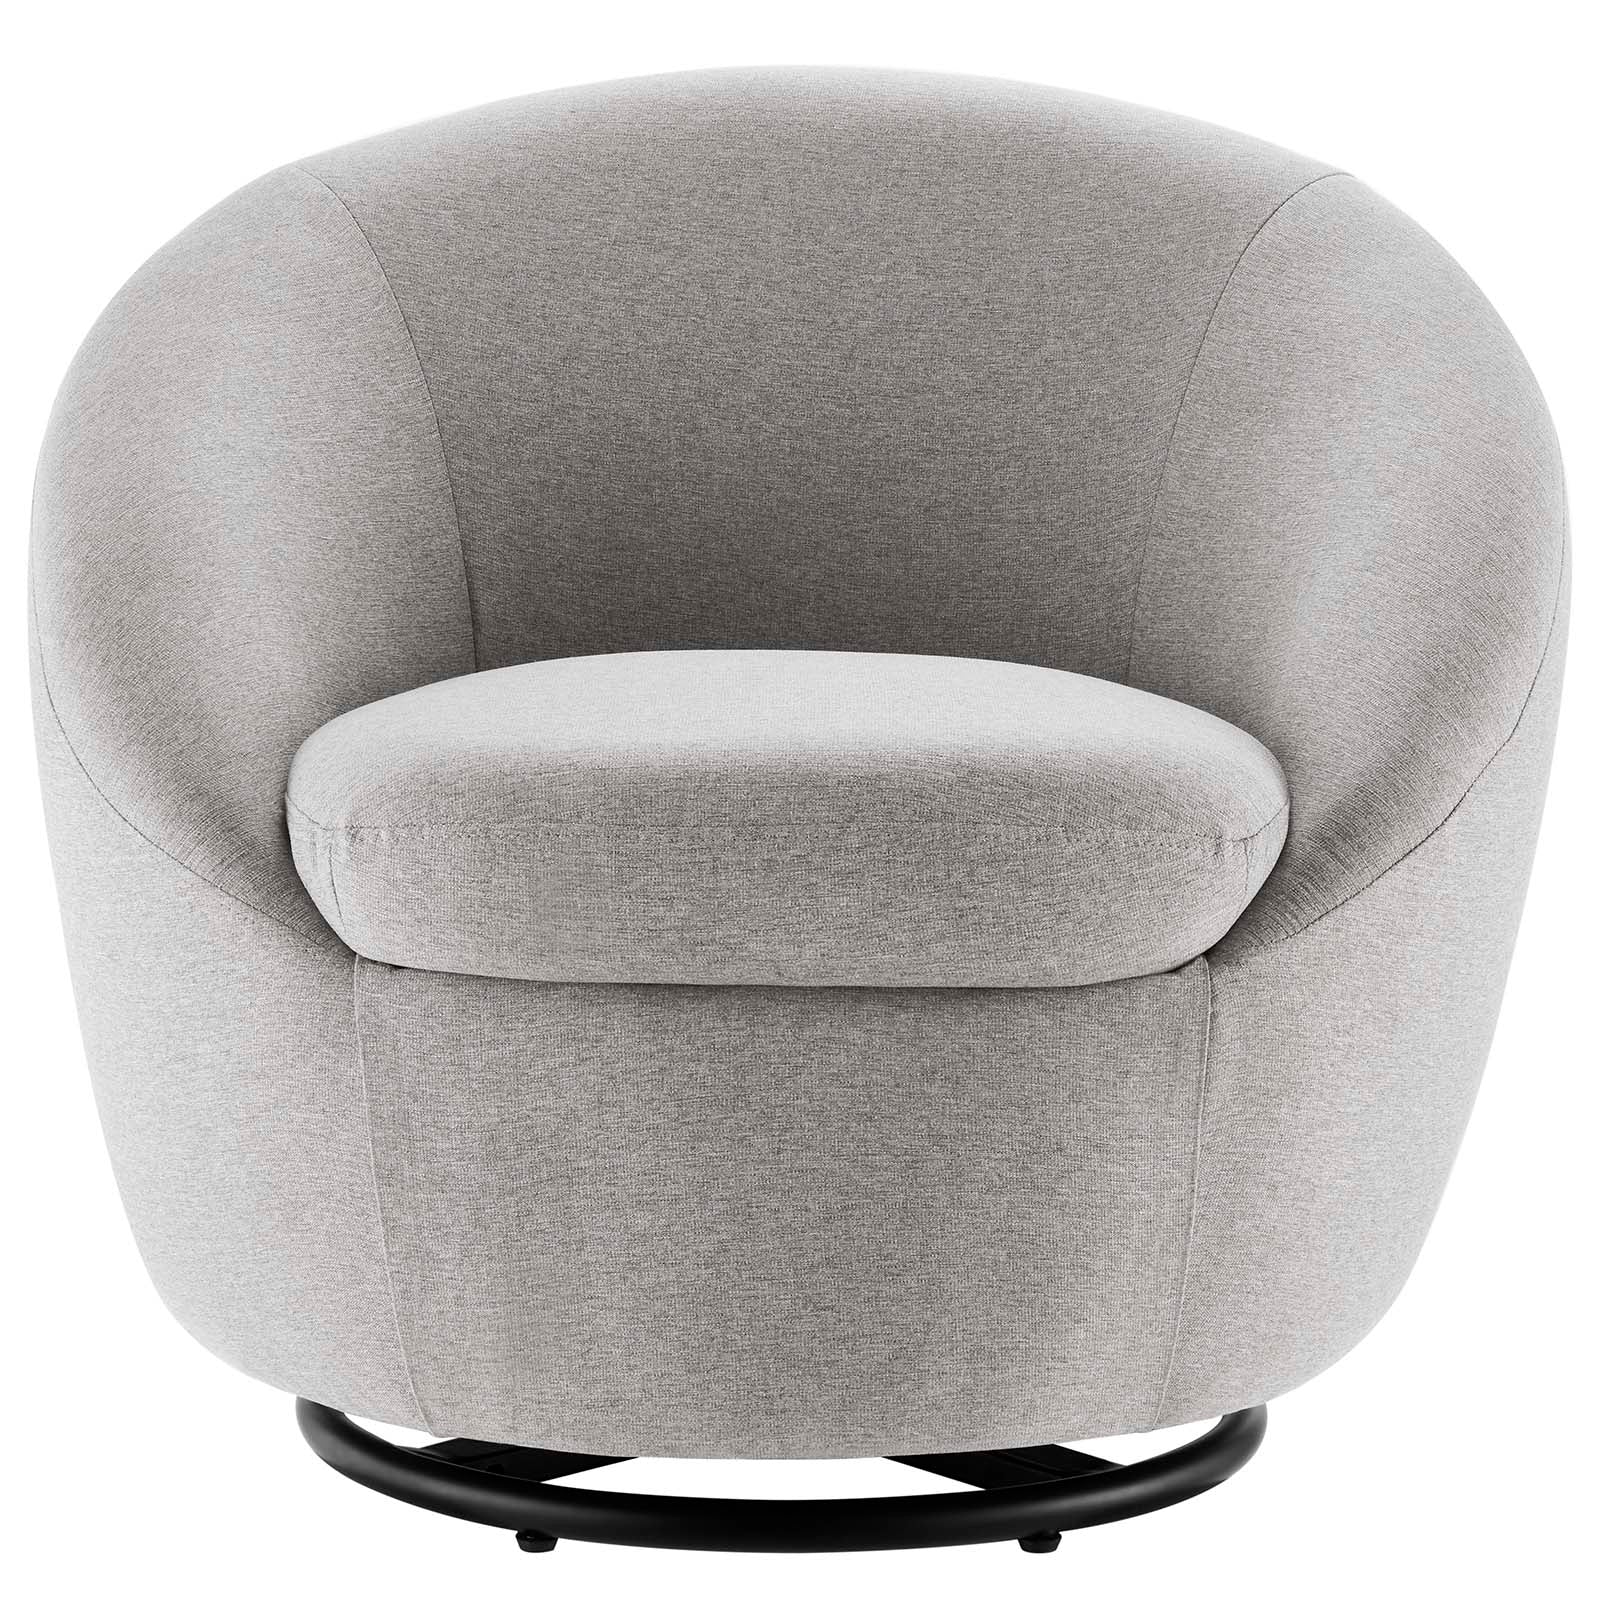 Buttercup Fabric Upholstered Swivel Chair - East Shore Modern Home Furnishings